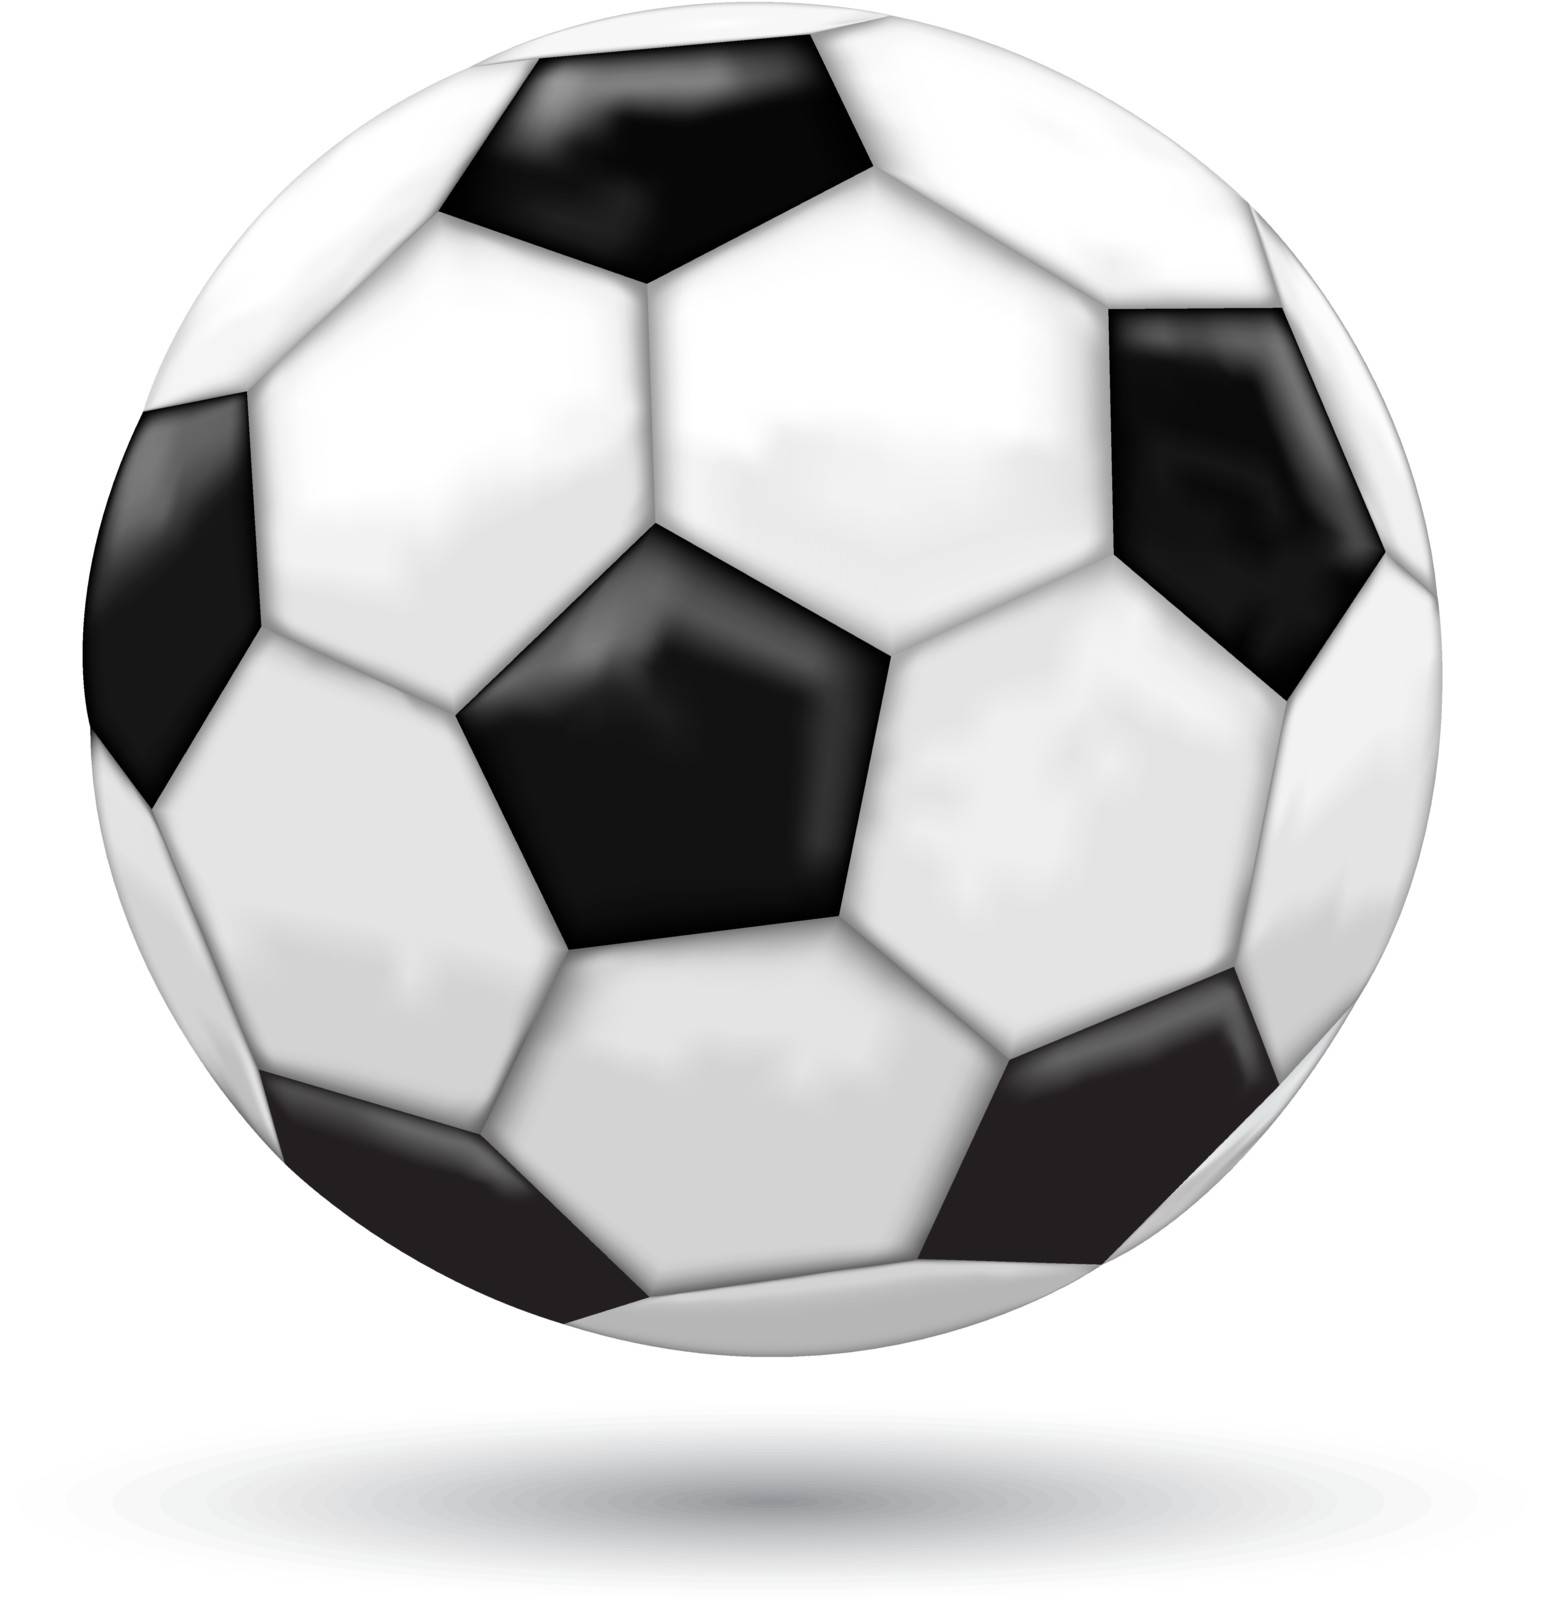 Classic mesh soccer ball isolated on the white background